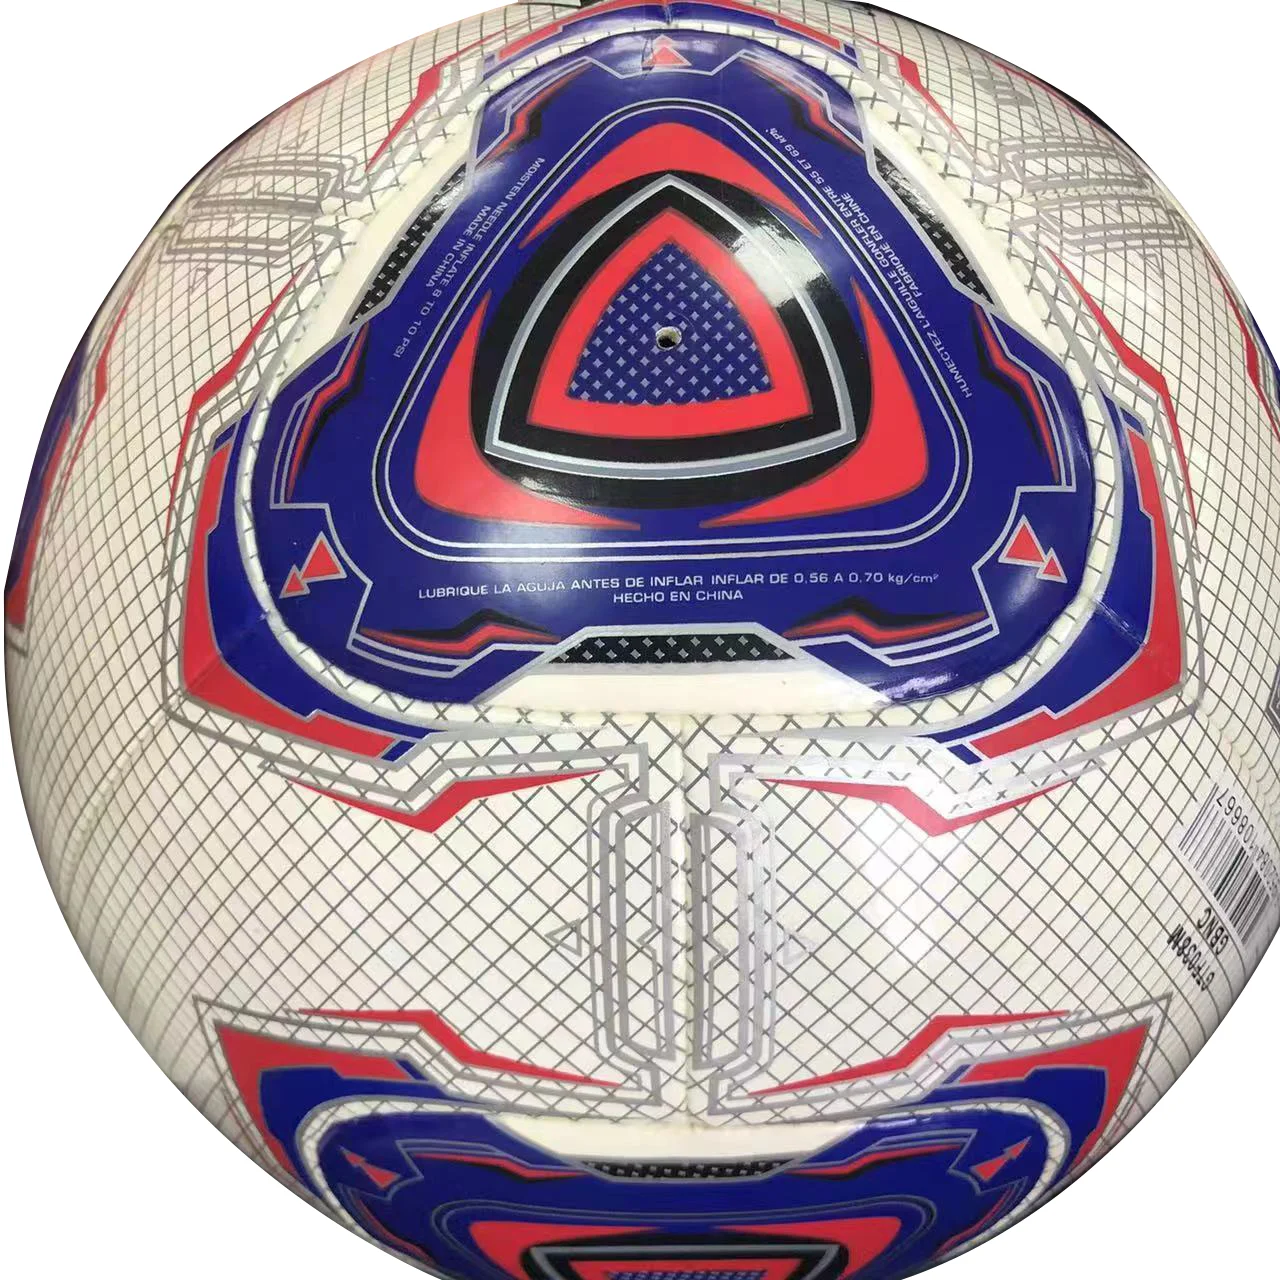 2022 Hot Selling New Soccer Balls Official World Cup High Quality Pu Material Seamless Football Champion League Balls